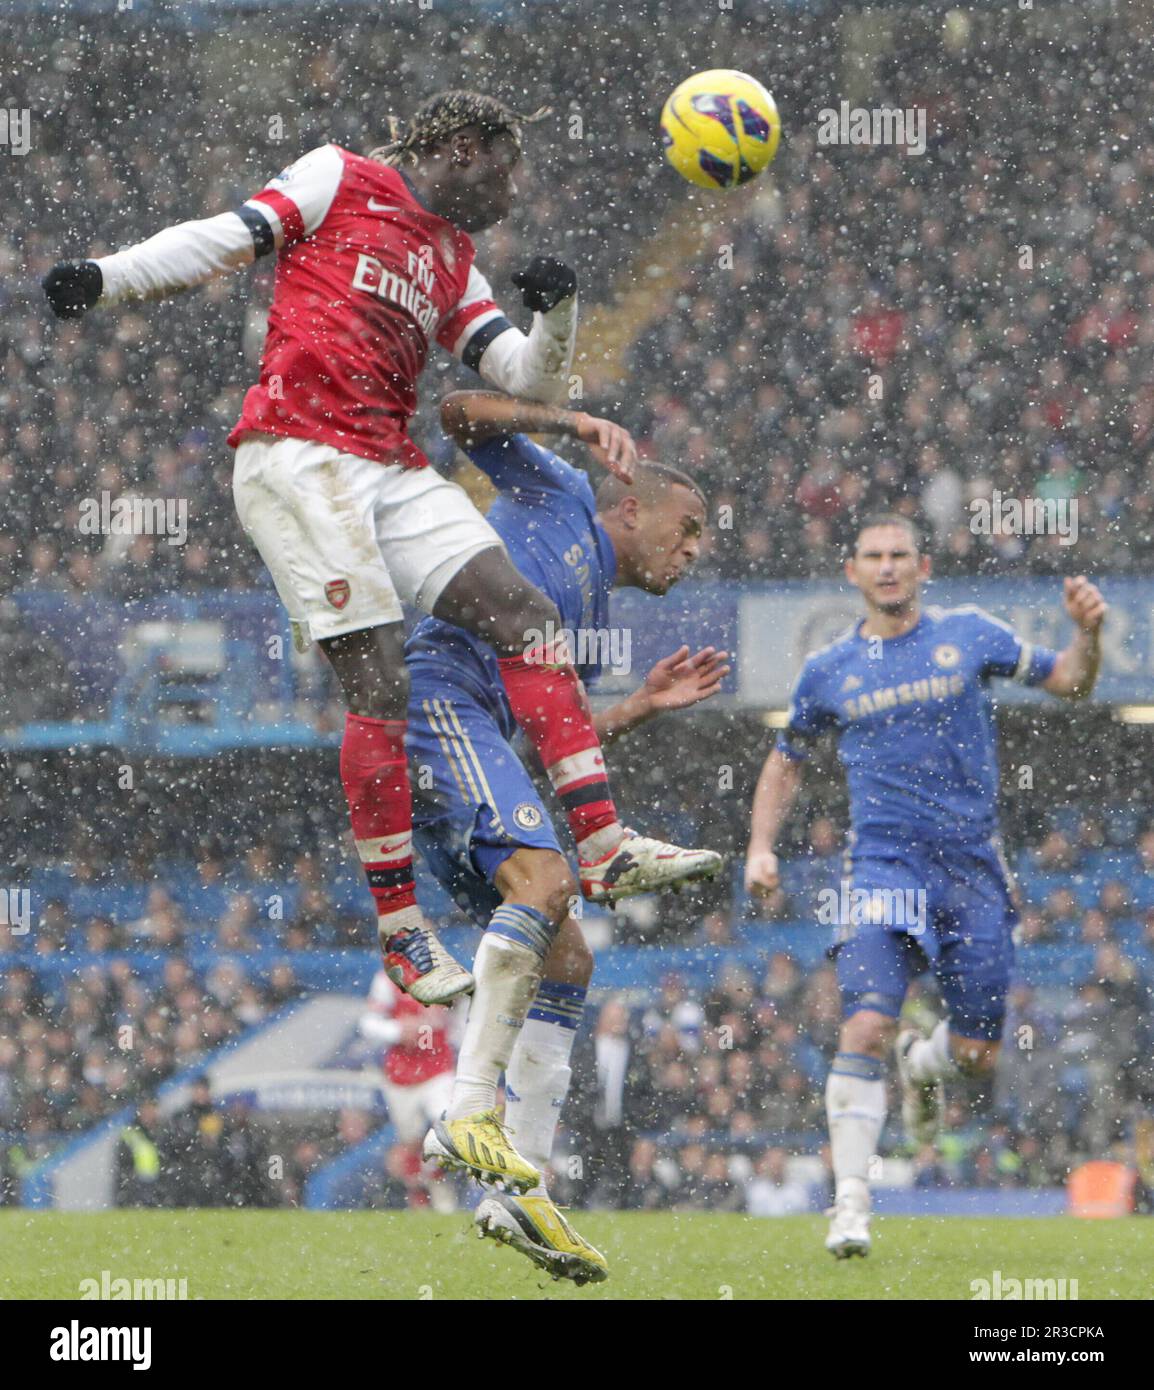 Arsenal's Bacary Sagna battles with Chelsea's Ashley Cole. Chelsea beat Arsenal 2:1Chelsea 20/01/13 Chelsea V Arsenal  20/01/13 The Premier League Pho Stock Photo